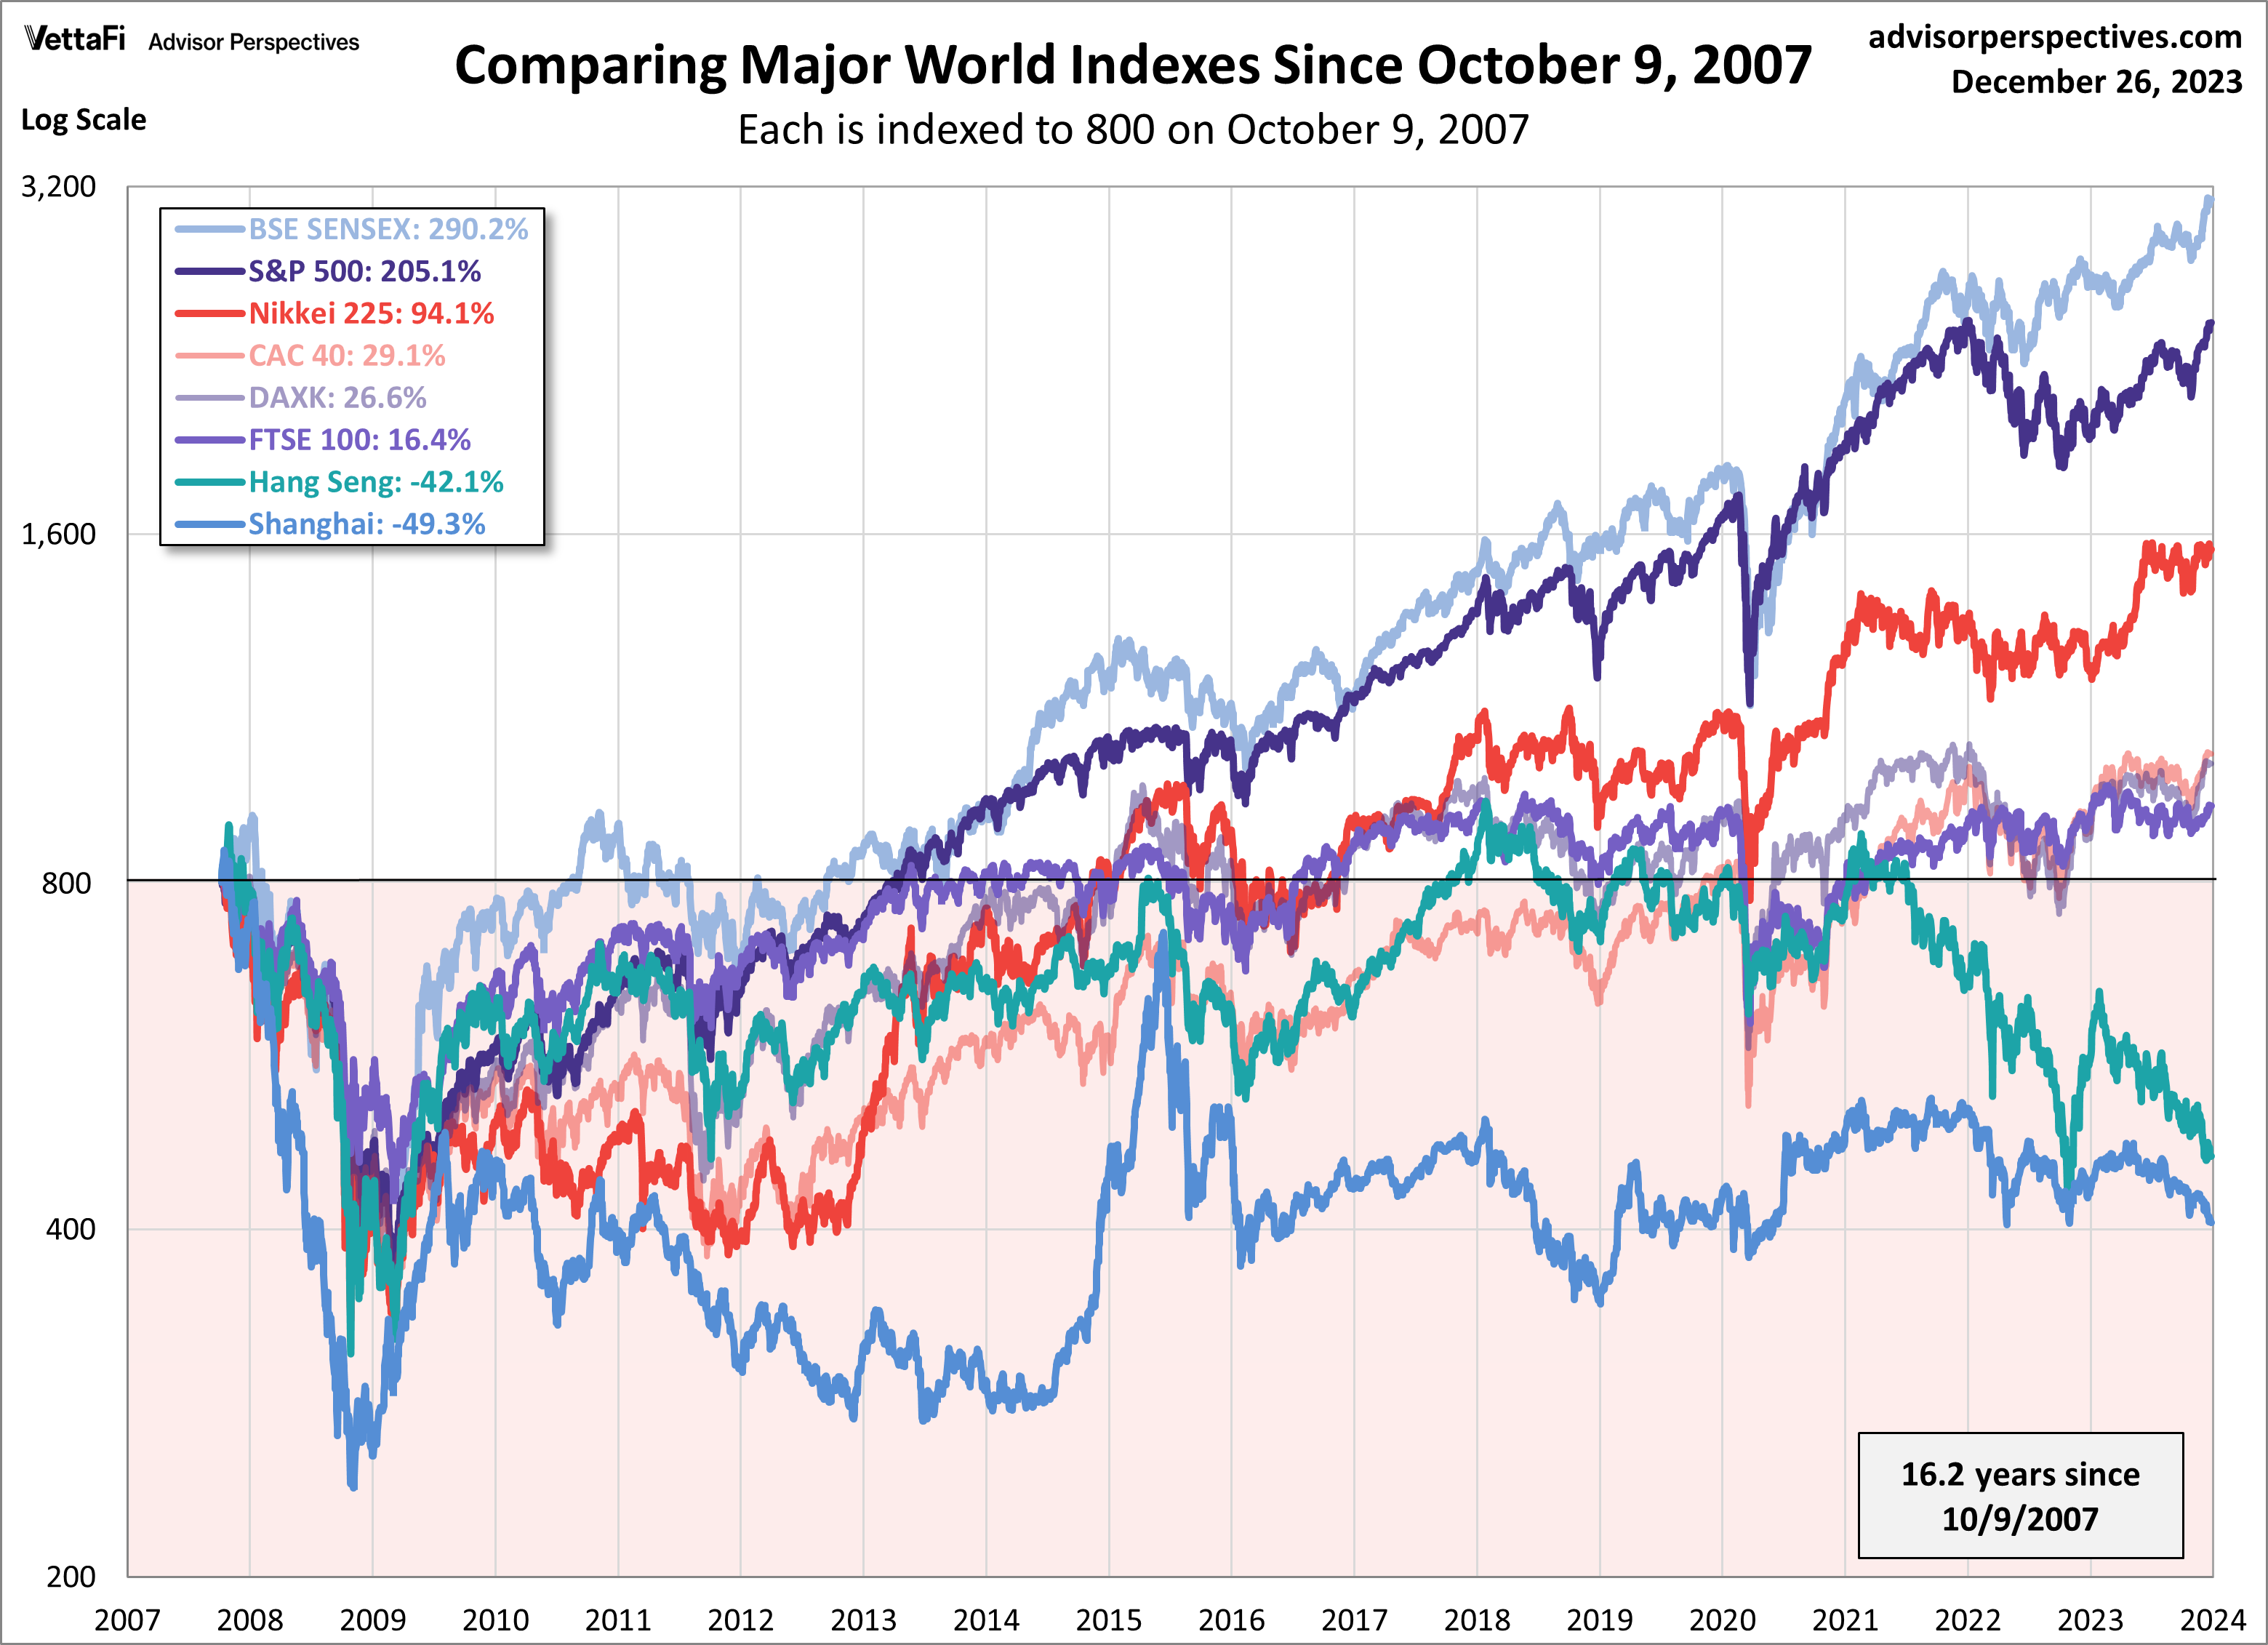 Major World Indexes Since Oct. 9 2007